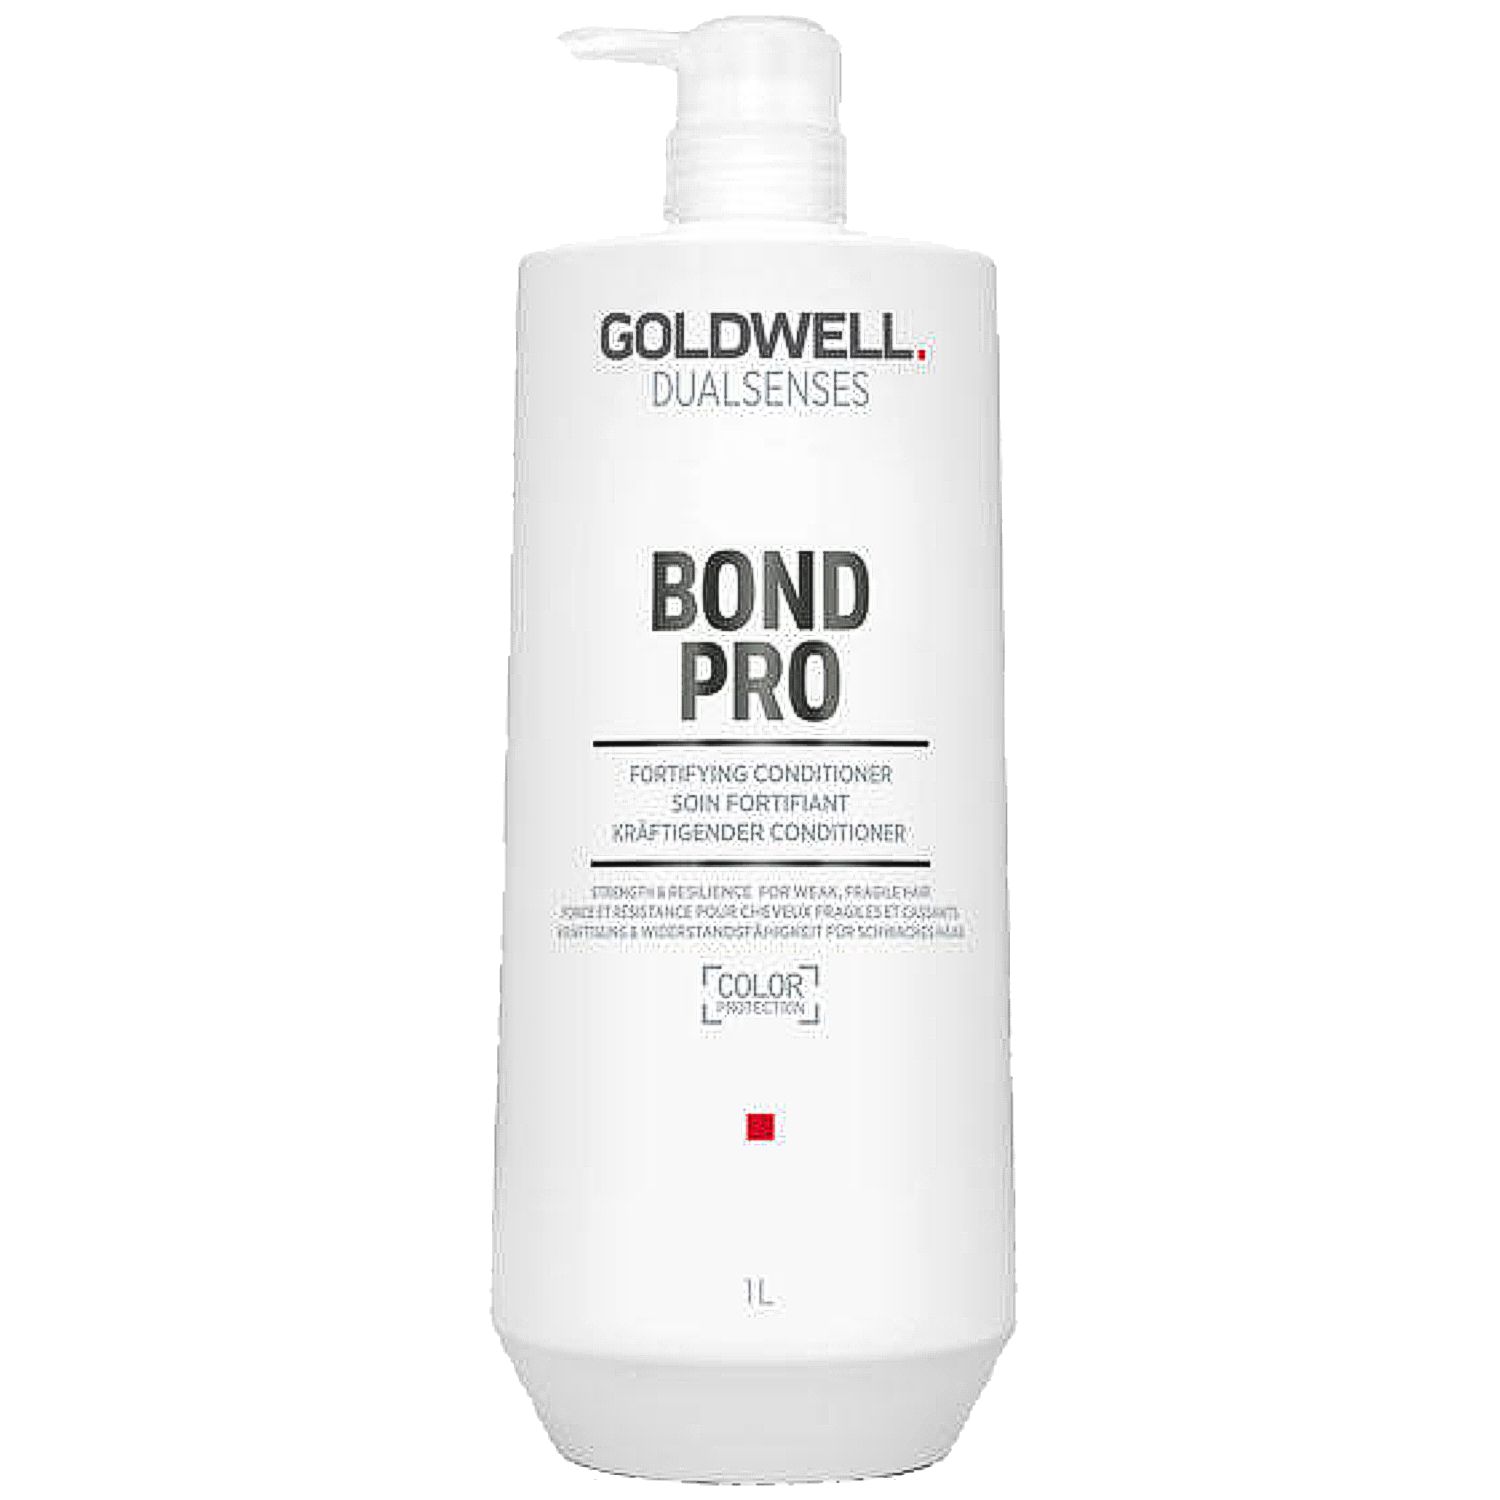 GOLDWELL Dualsenses BOND PRO Fortifying Conditioner 1 L